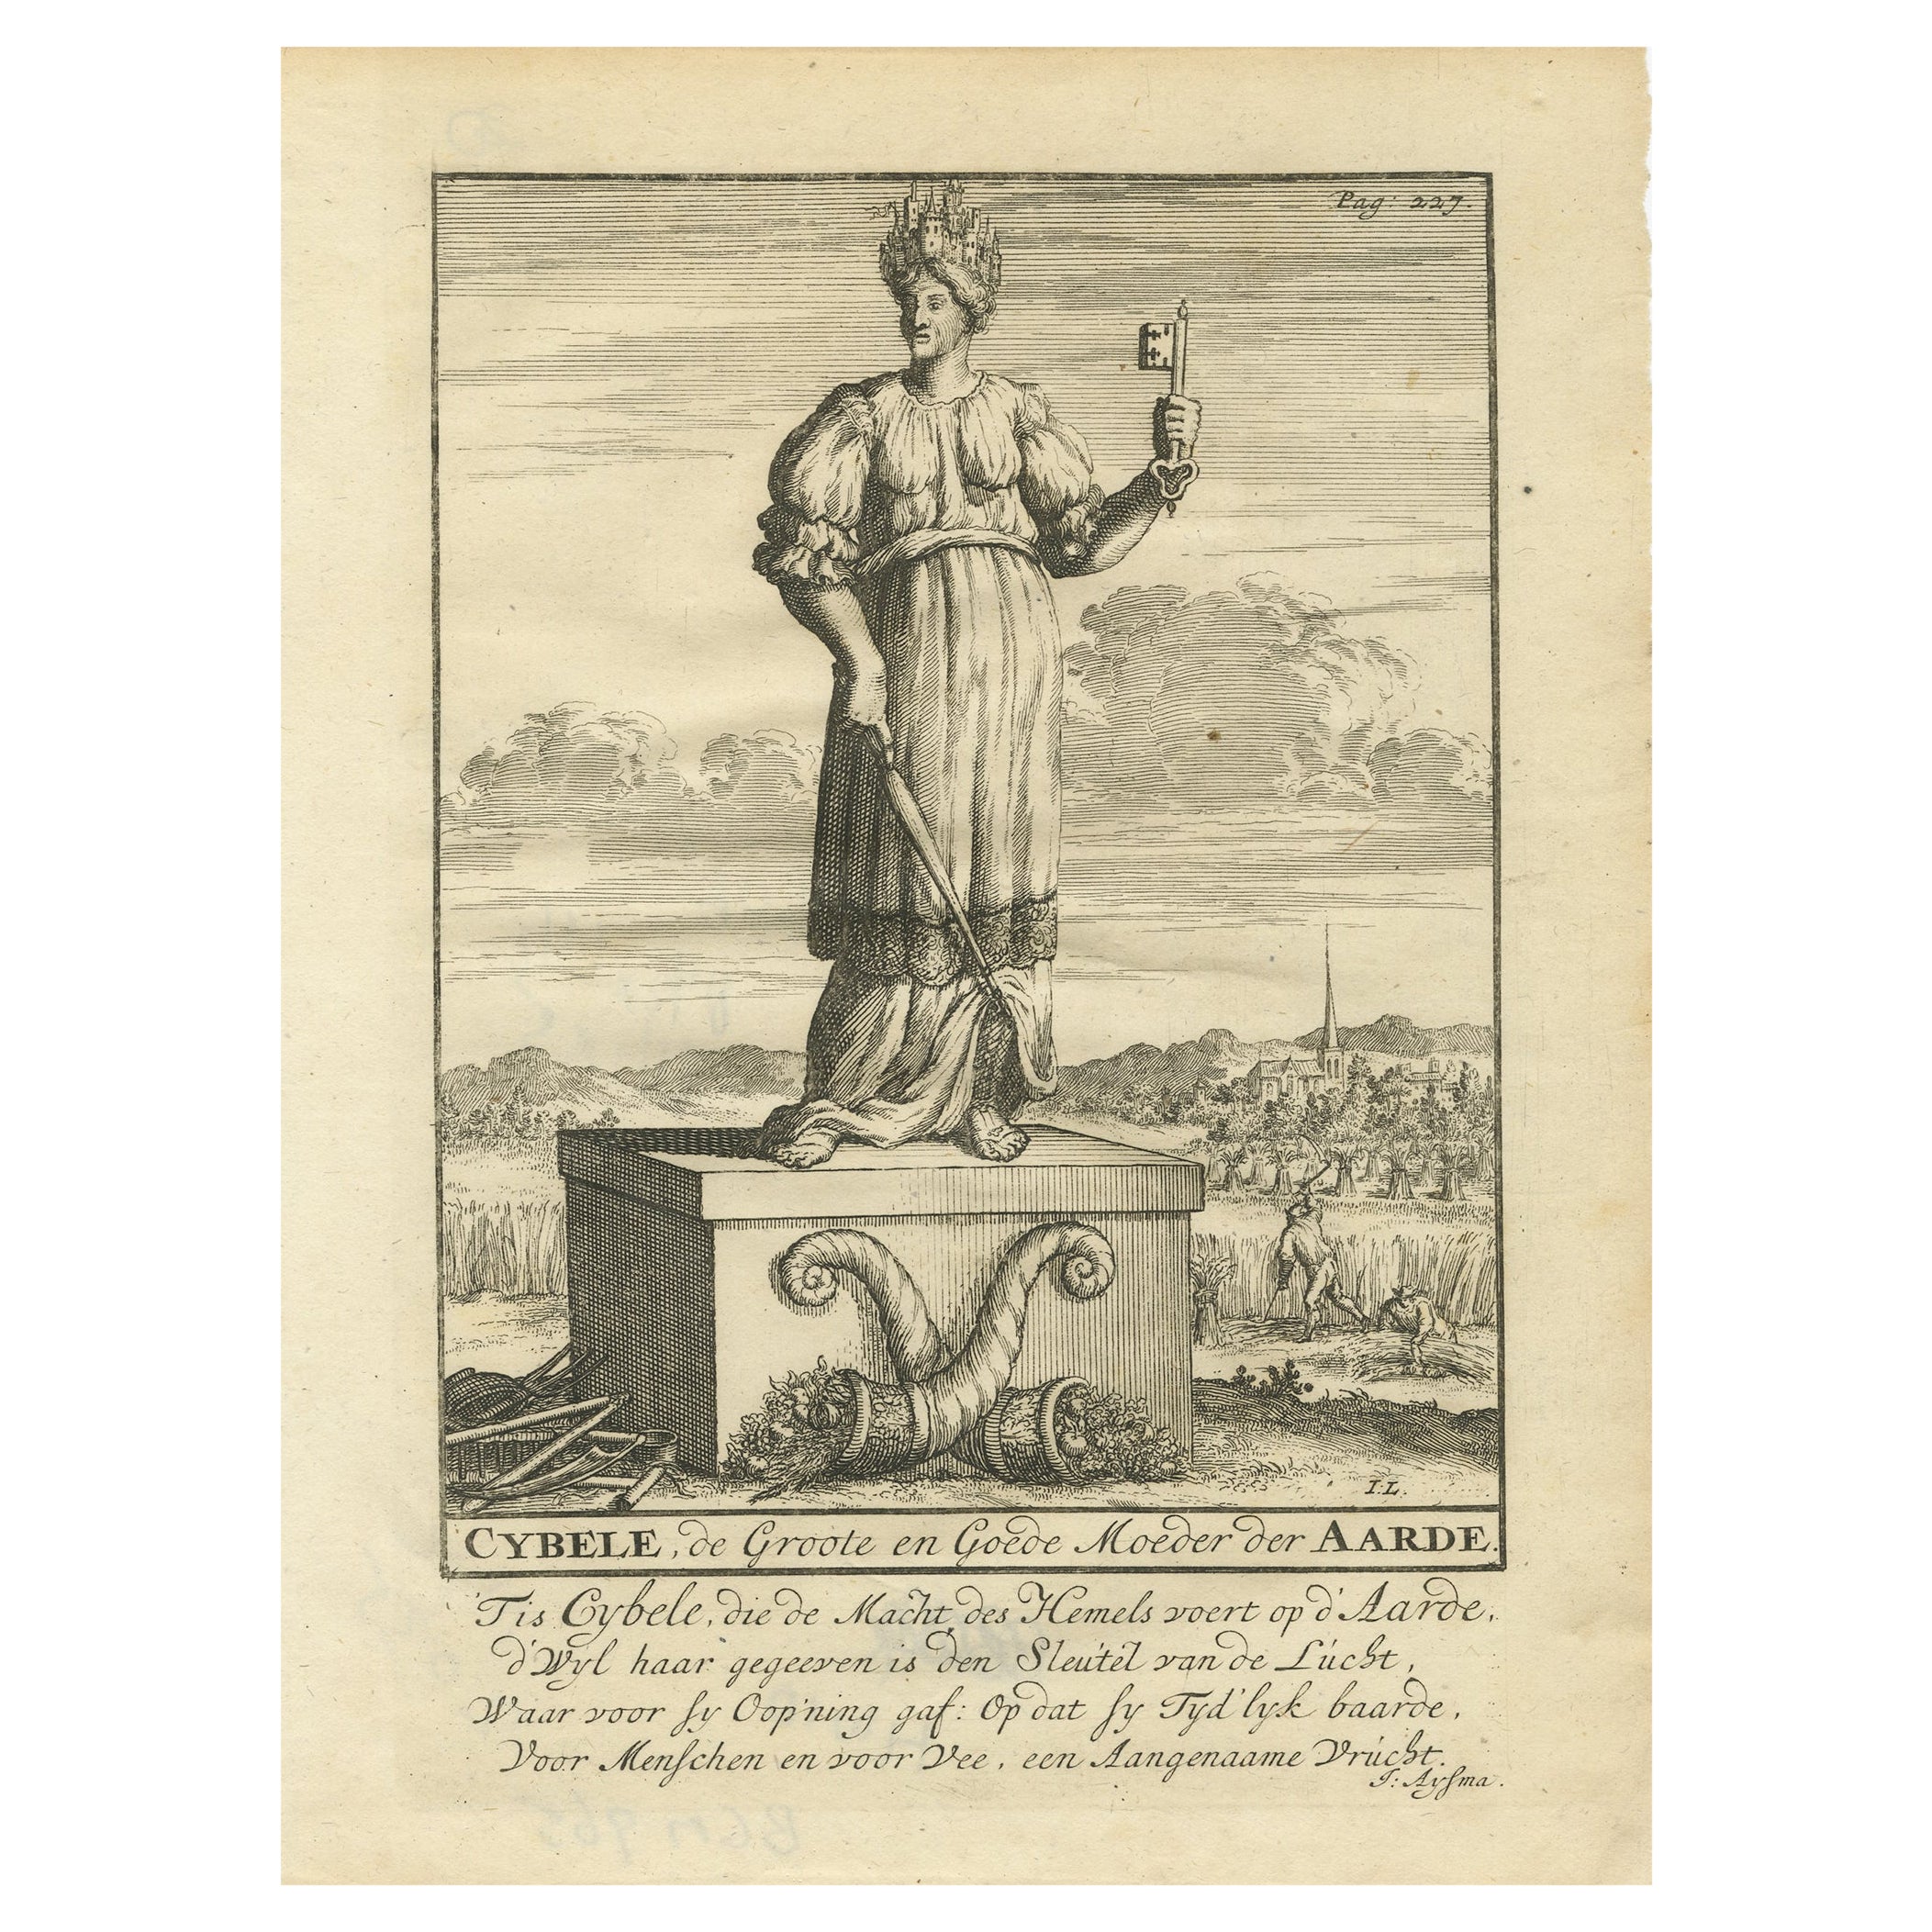 Original Old Engraving showing Cybele, the Anatolian Mother Goddess, 1686